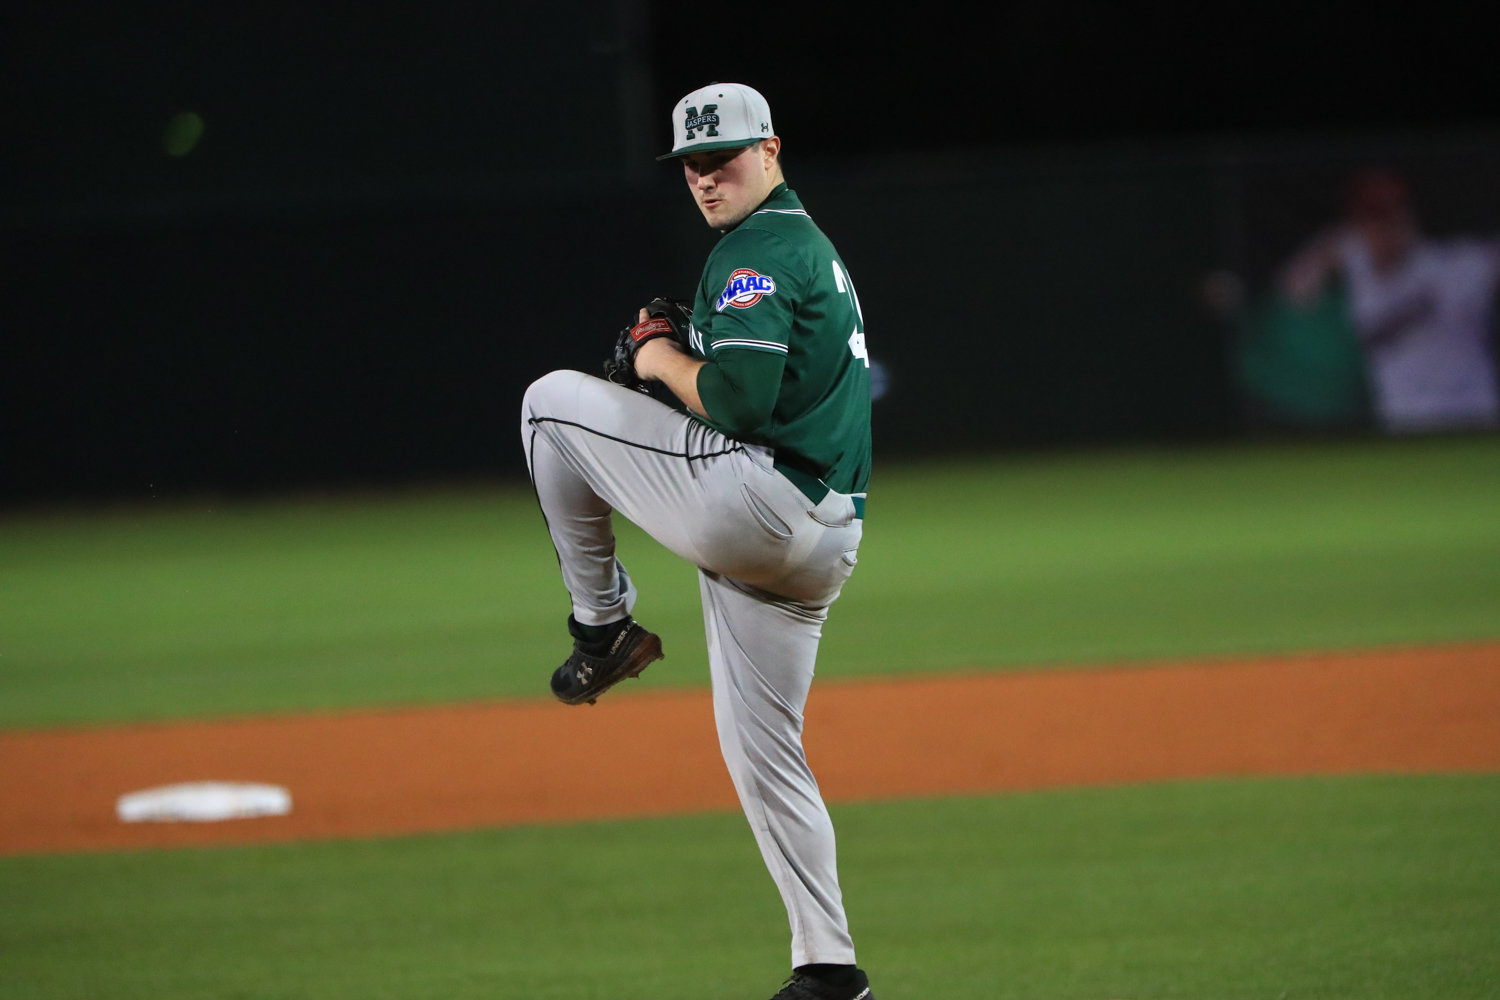 Manhattan right-hander T.J. Stuart saw his senior season cut short due to the coronavirus crisis. Now he has to make a decision on whether to return for one more season, or pursue his dream of playing pro baseball.